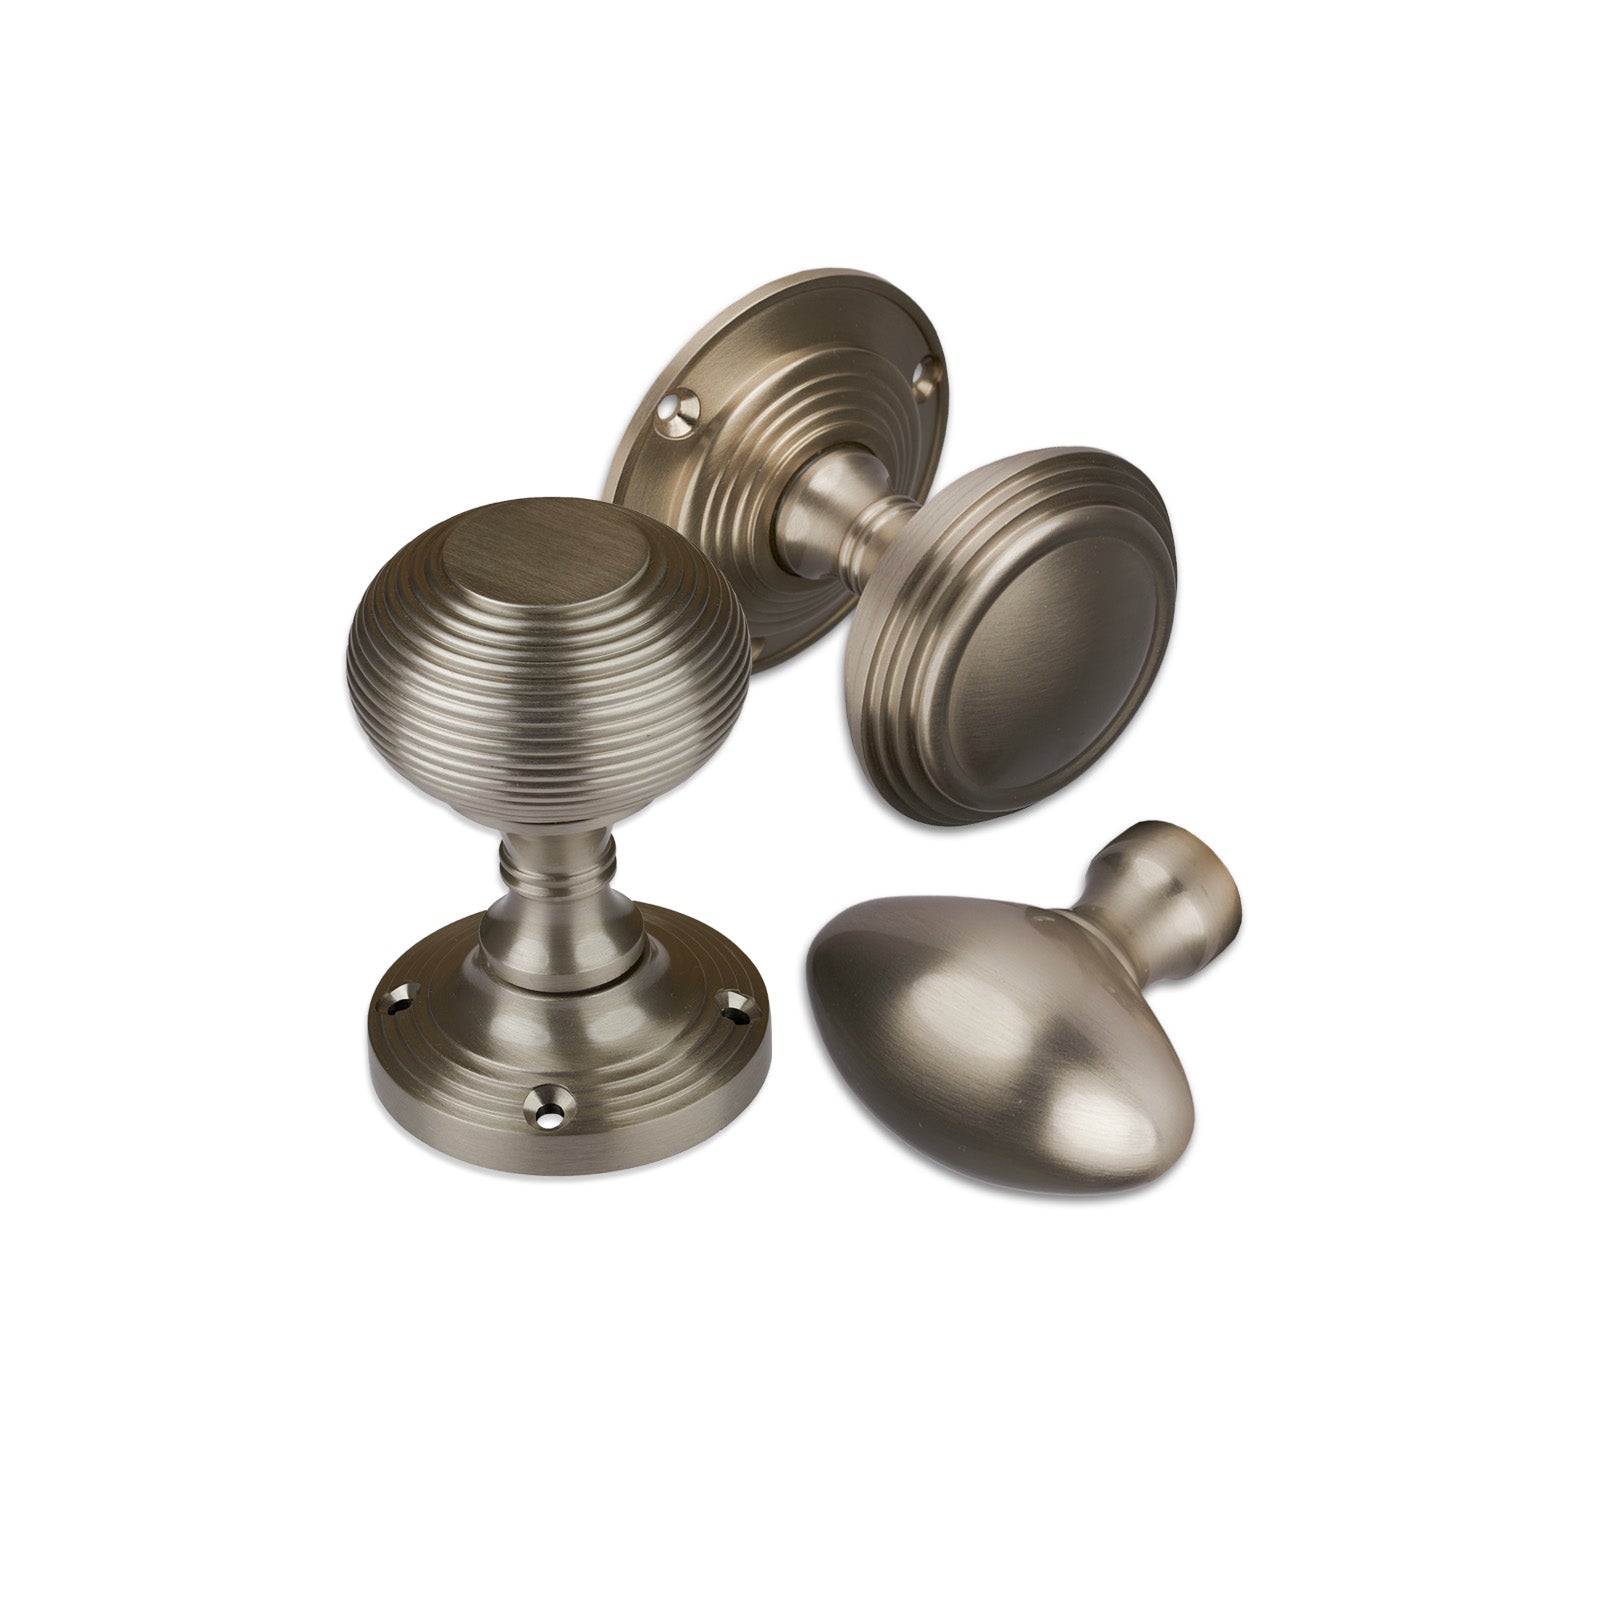 Classic Brass Door Knobs from Period Style